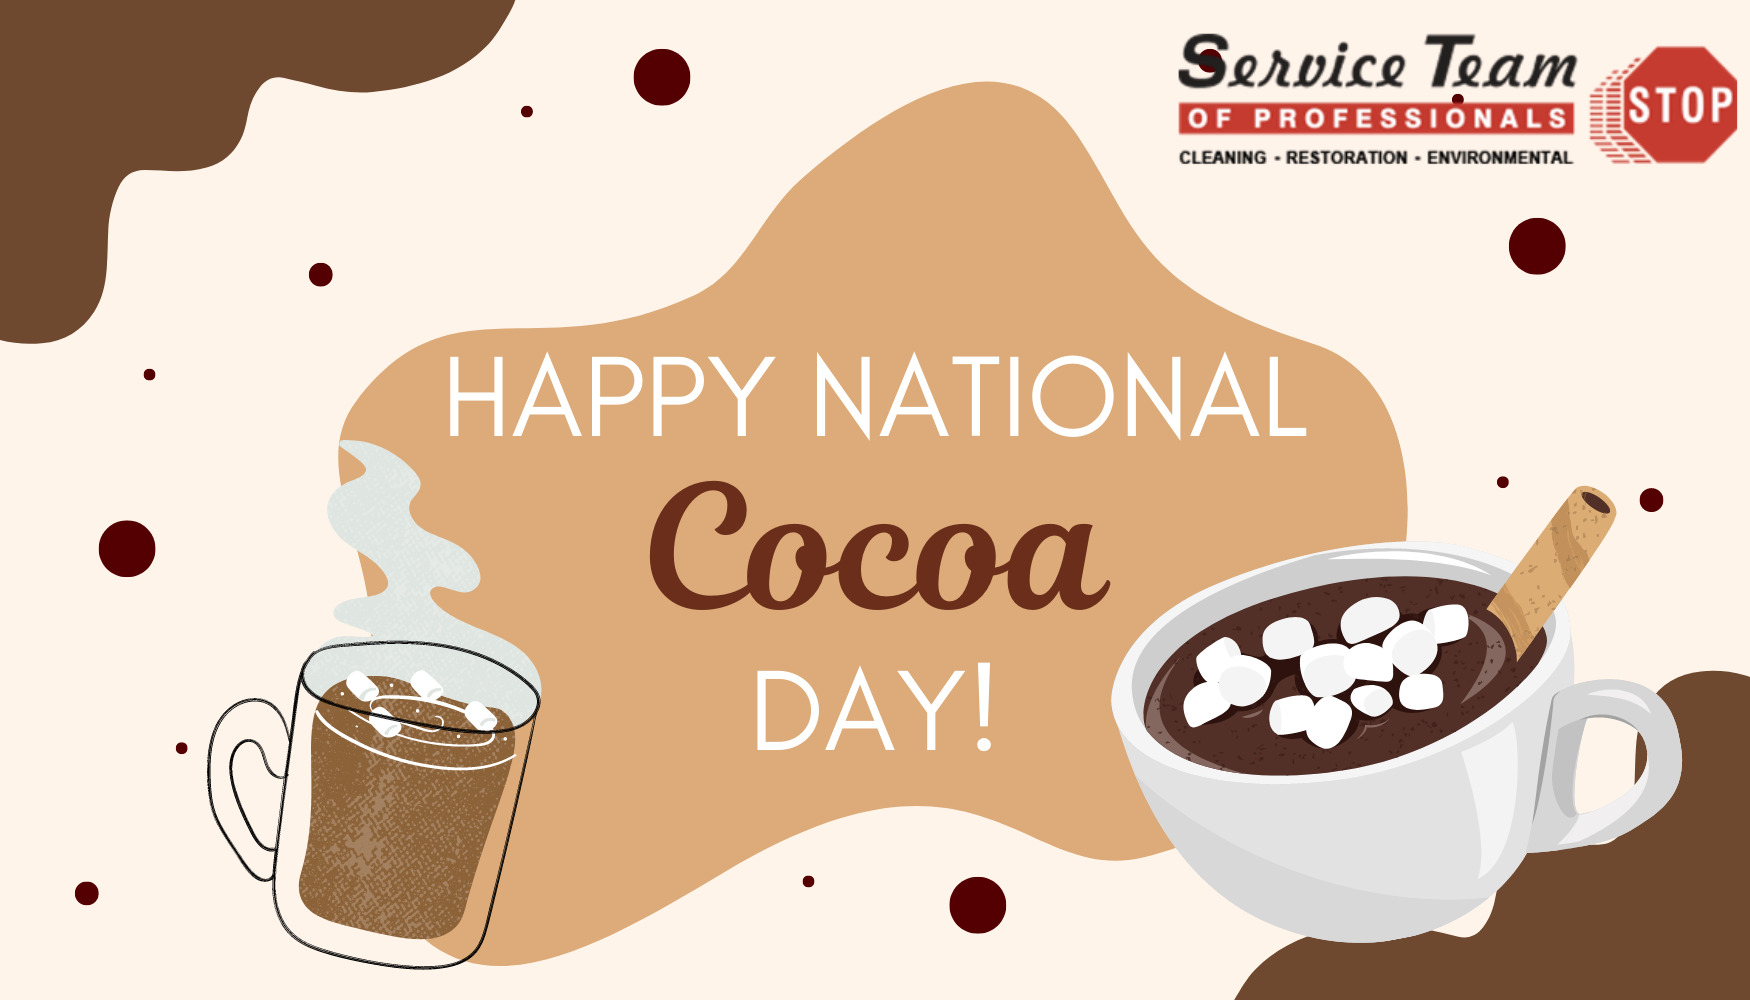 Happy National Cocoa Day